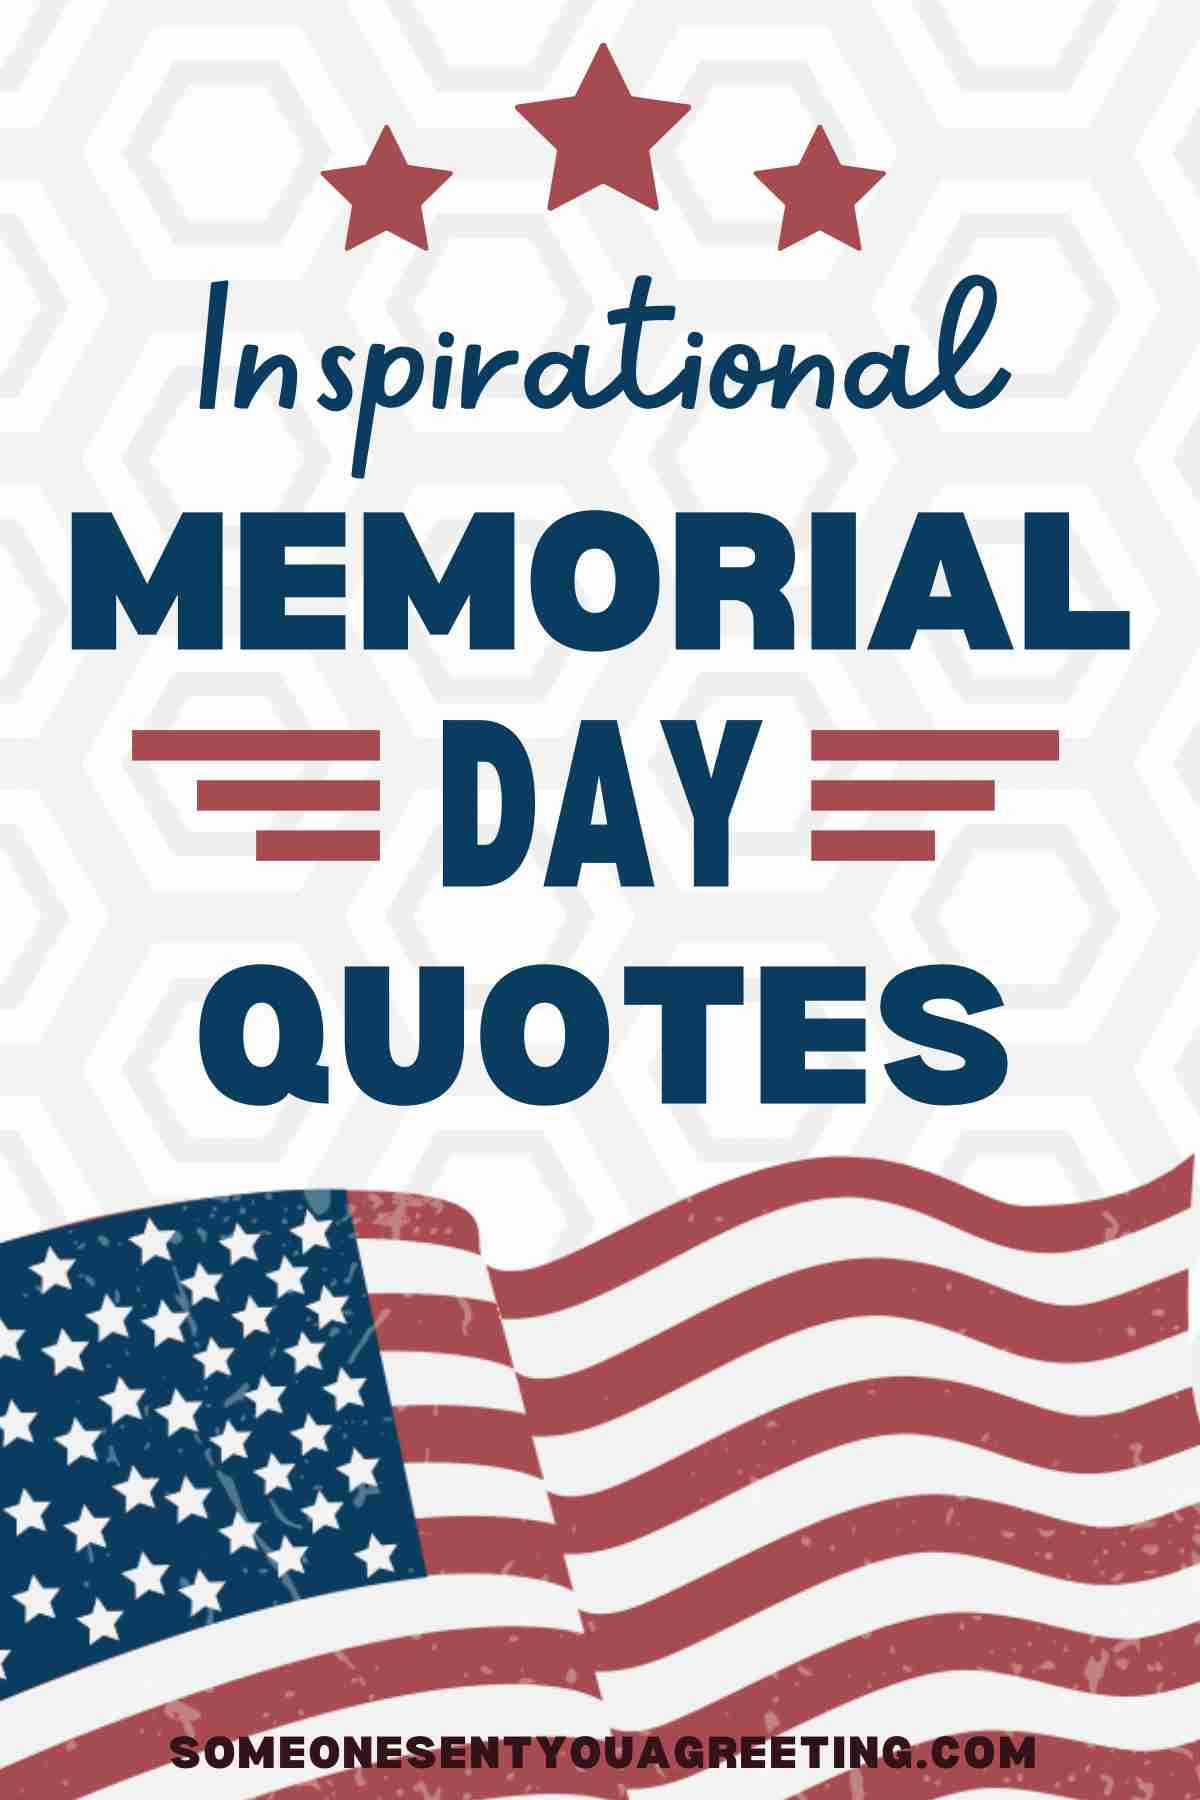 inspirational memorial day quotes